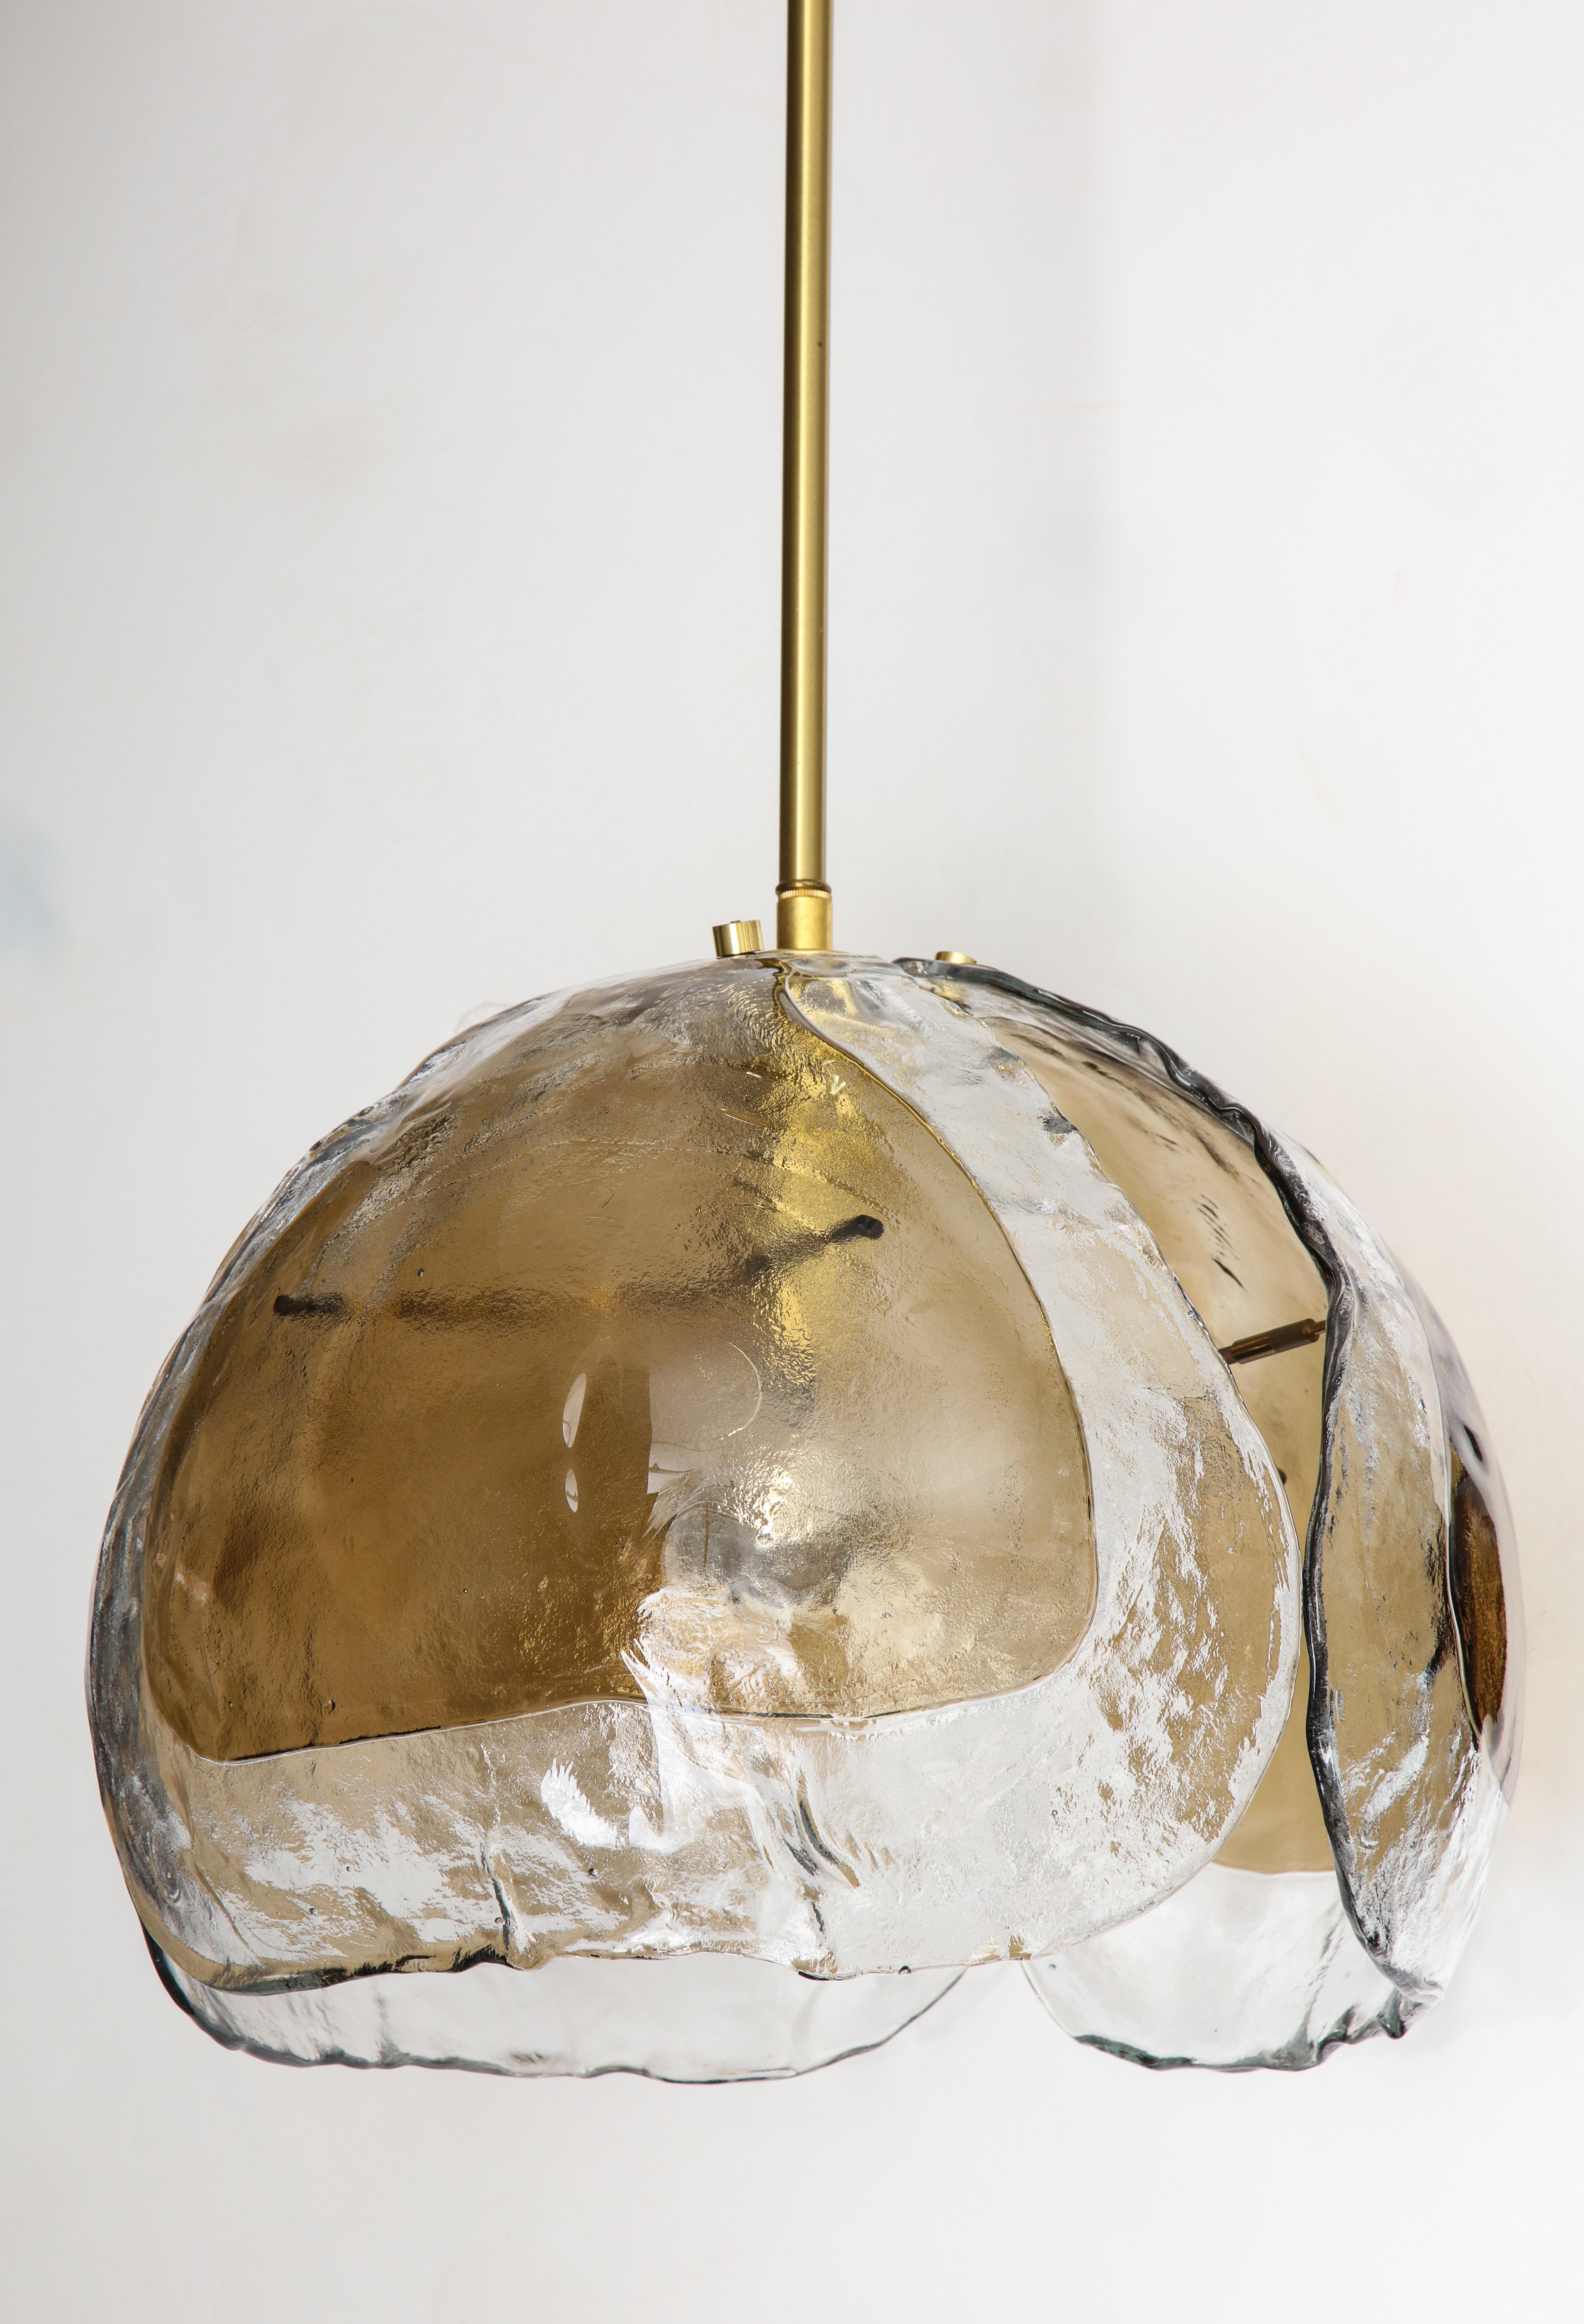 Large midcentury Murano glass pendant light by Mazzega.
The three clear and smoky glass elements come together to form a bowl shape. This is suspended by a brass rod and canopy which can be customized to your desired length.
The fixture has been